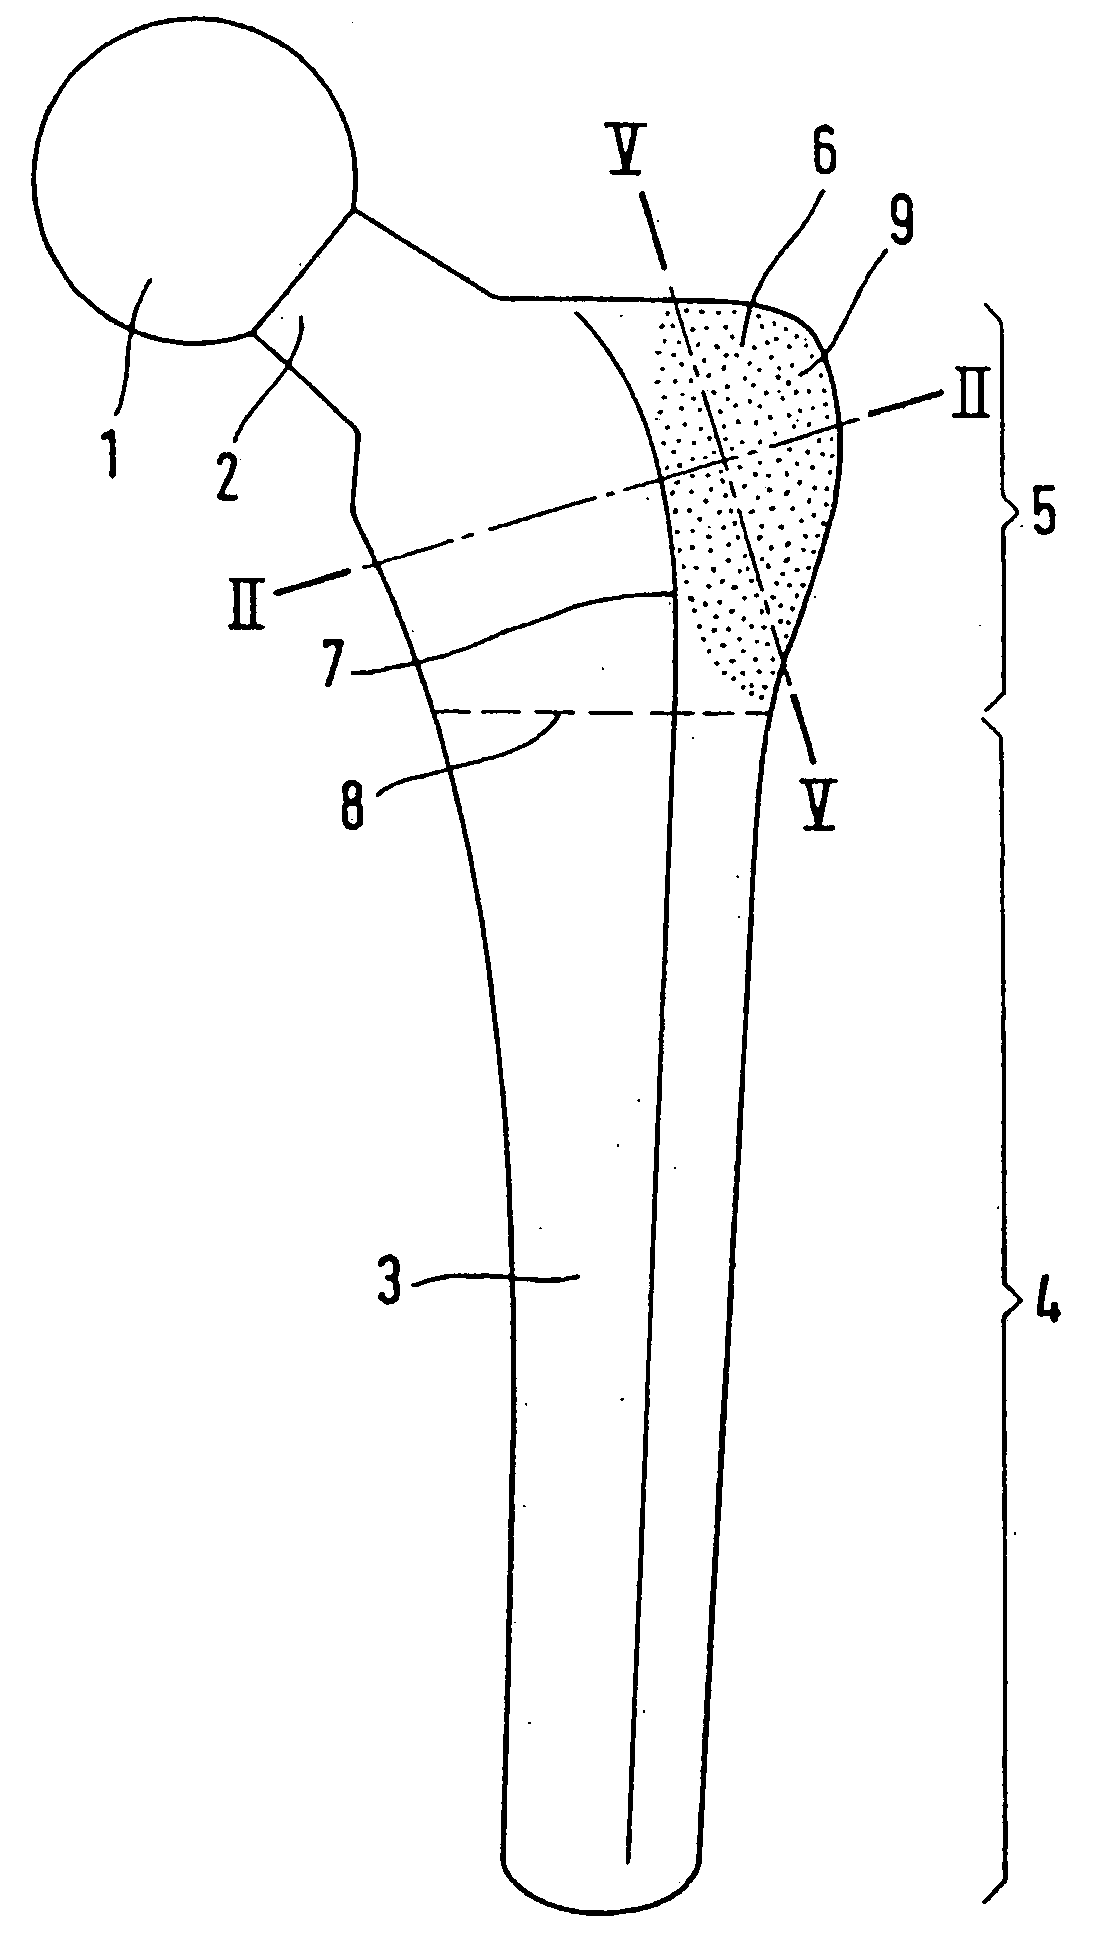 Hip Joint Prosthesis with a Shaft to be Inserted Into the Femur